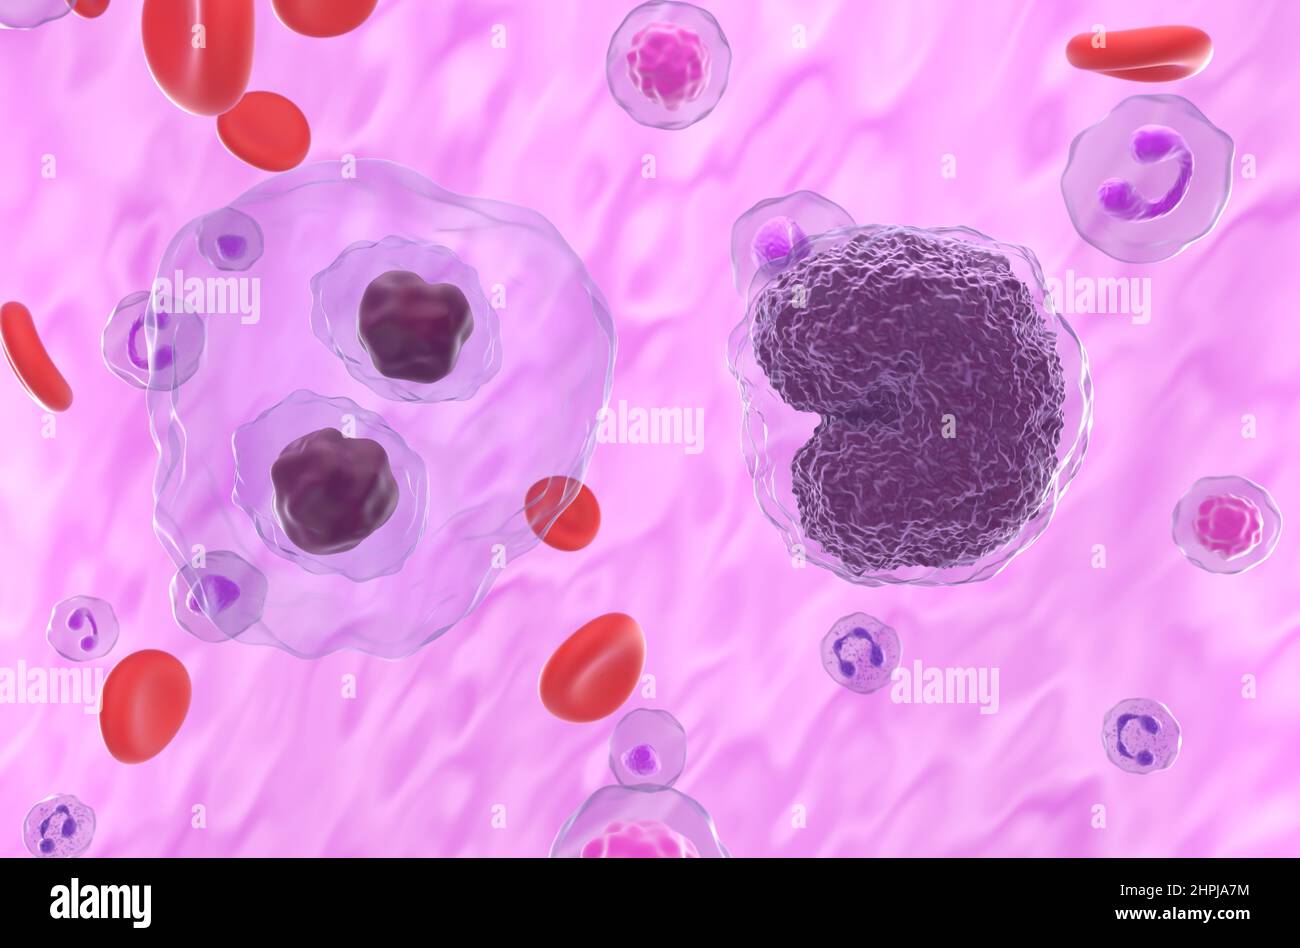 Hodgkin lymphoma (HL) and non-hodgkin lymphoma (NHL) cells in the blood flow - closeup view 3d illustration Stock Photo